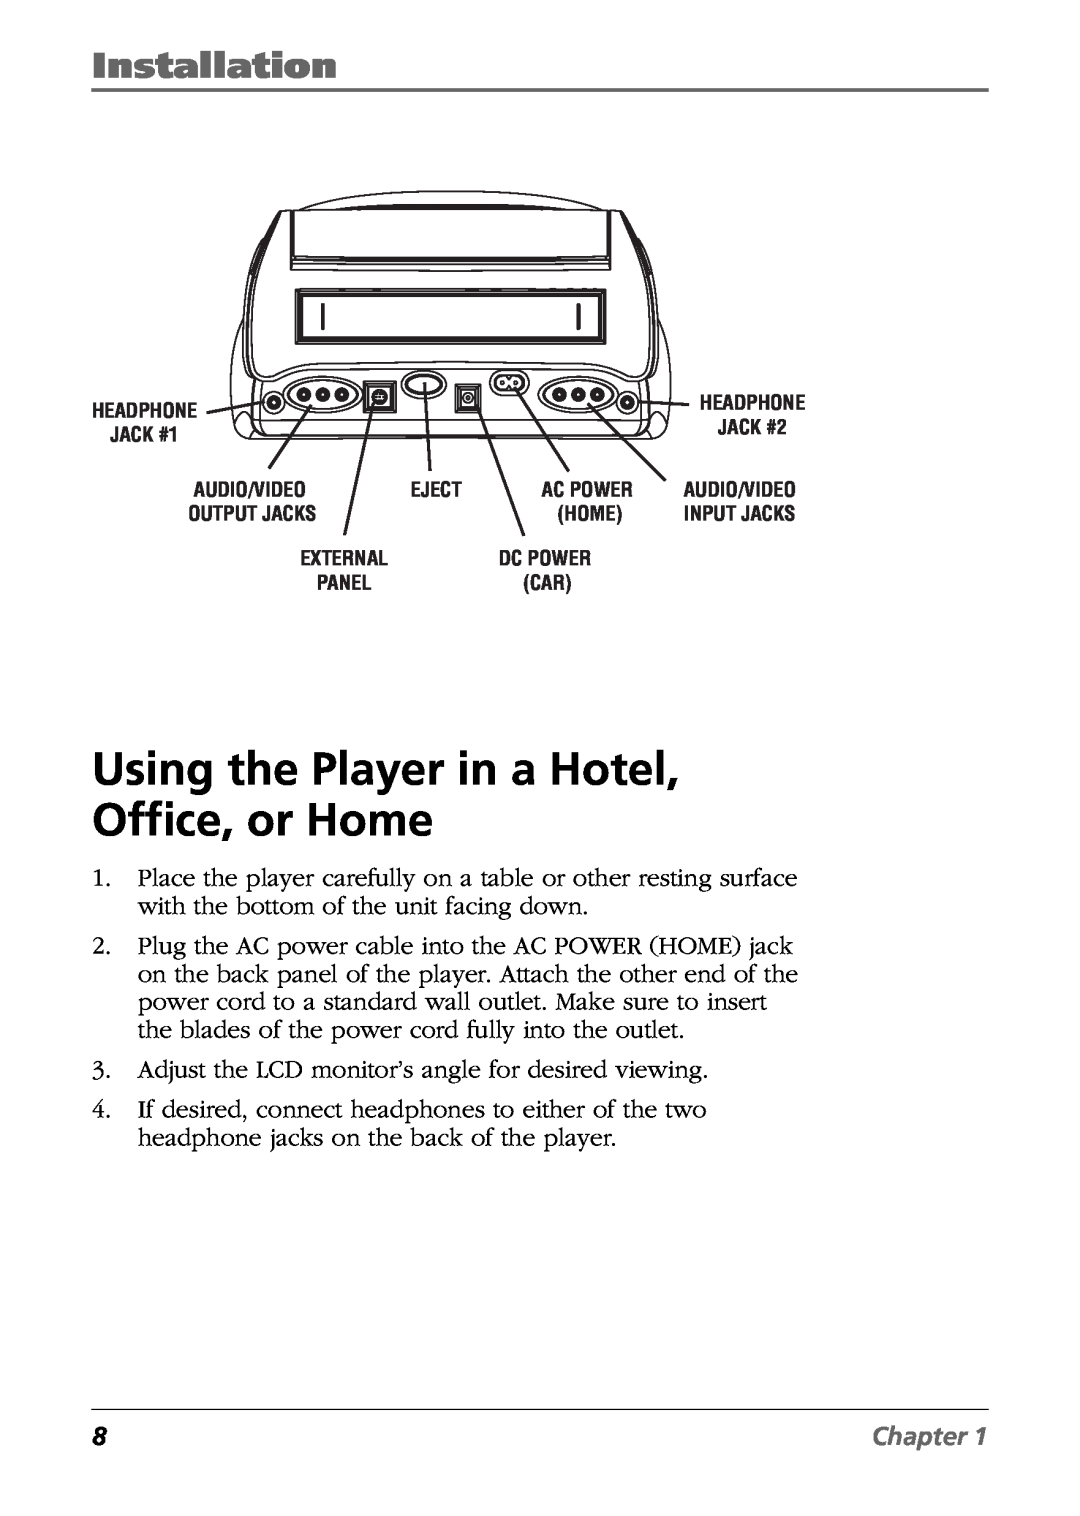 RCA Mobile Video Cassette Player manual Using the Player in a Hotel, Office, or Home, Installation, Chapter, Eject 